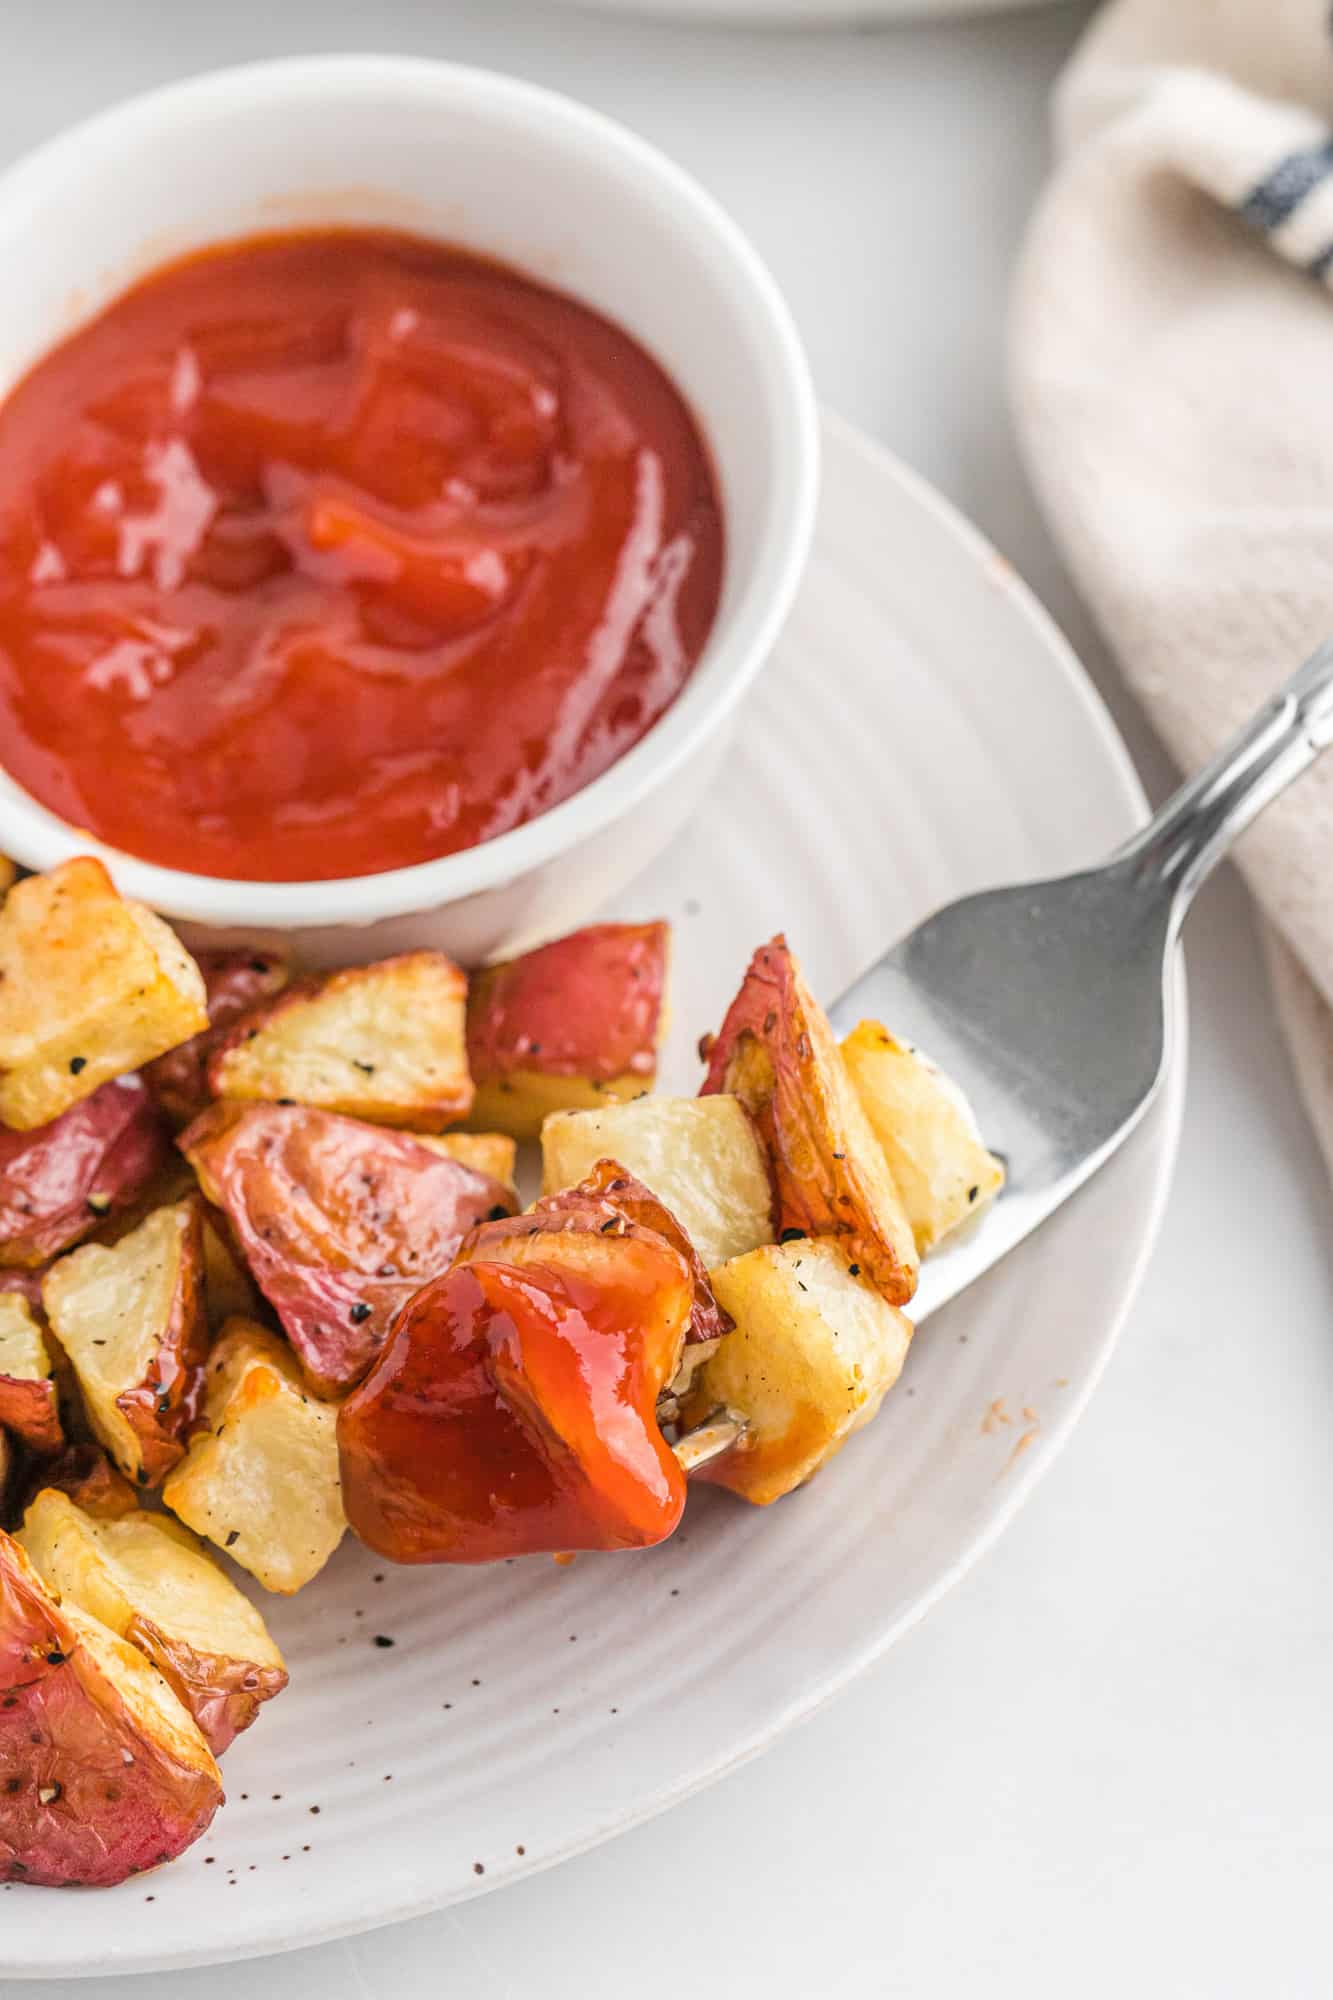 Roasted potatoes on a plate with ketchup.